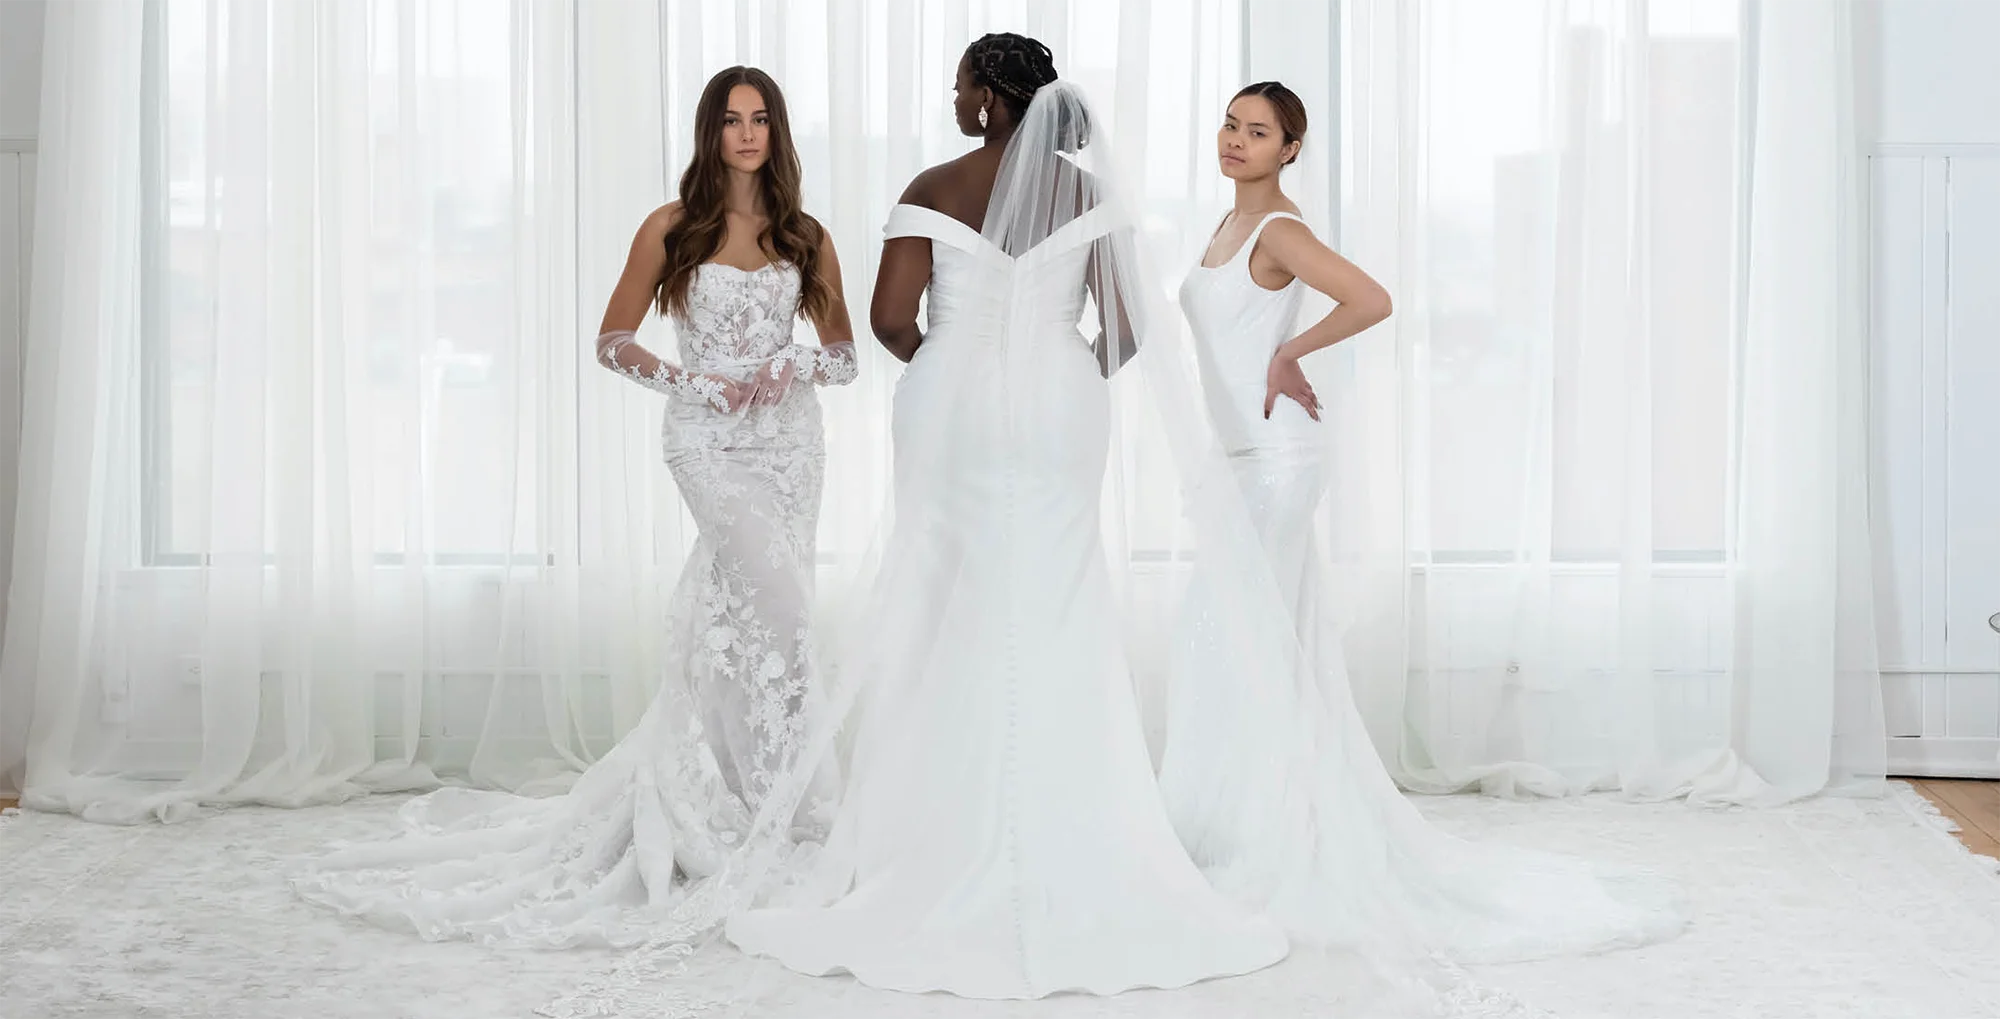 3 brides in varying dresses